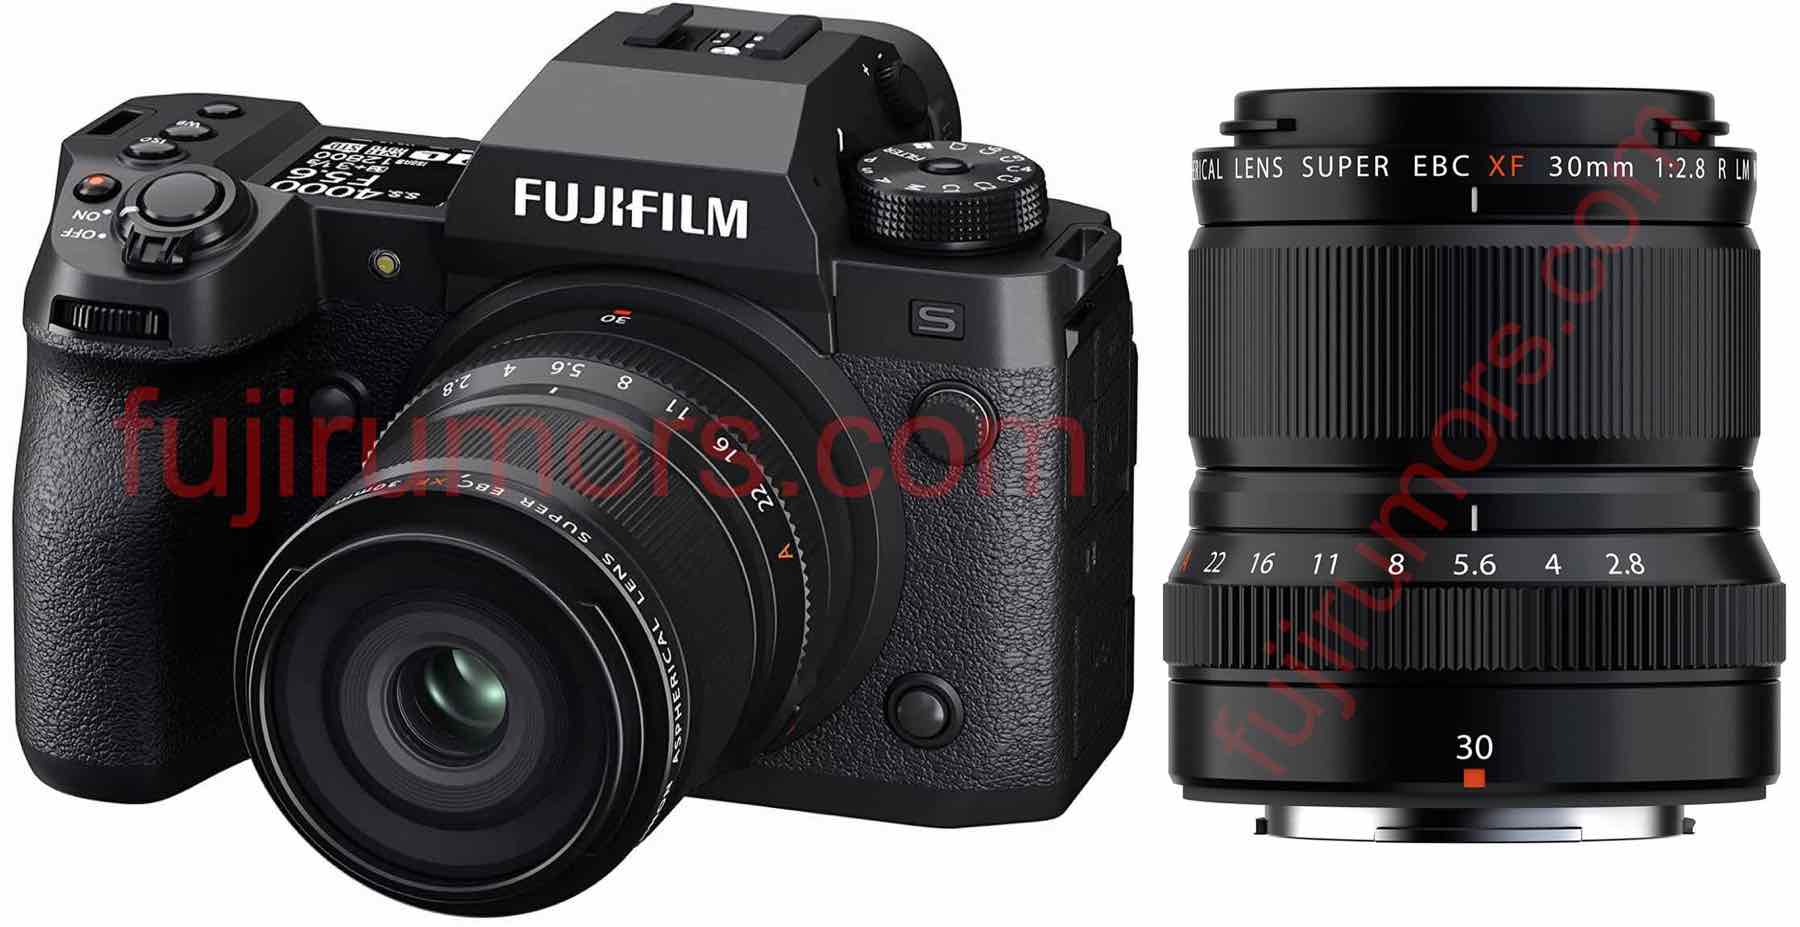 LEAKED: First Images of Fujinon XF30mm f/2.8 R LM WR Macro - Fuji 